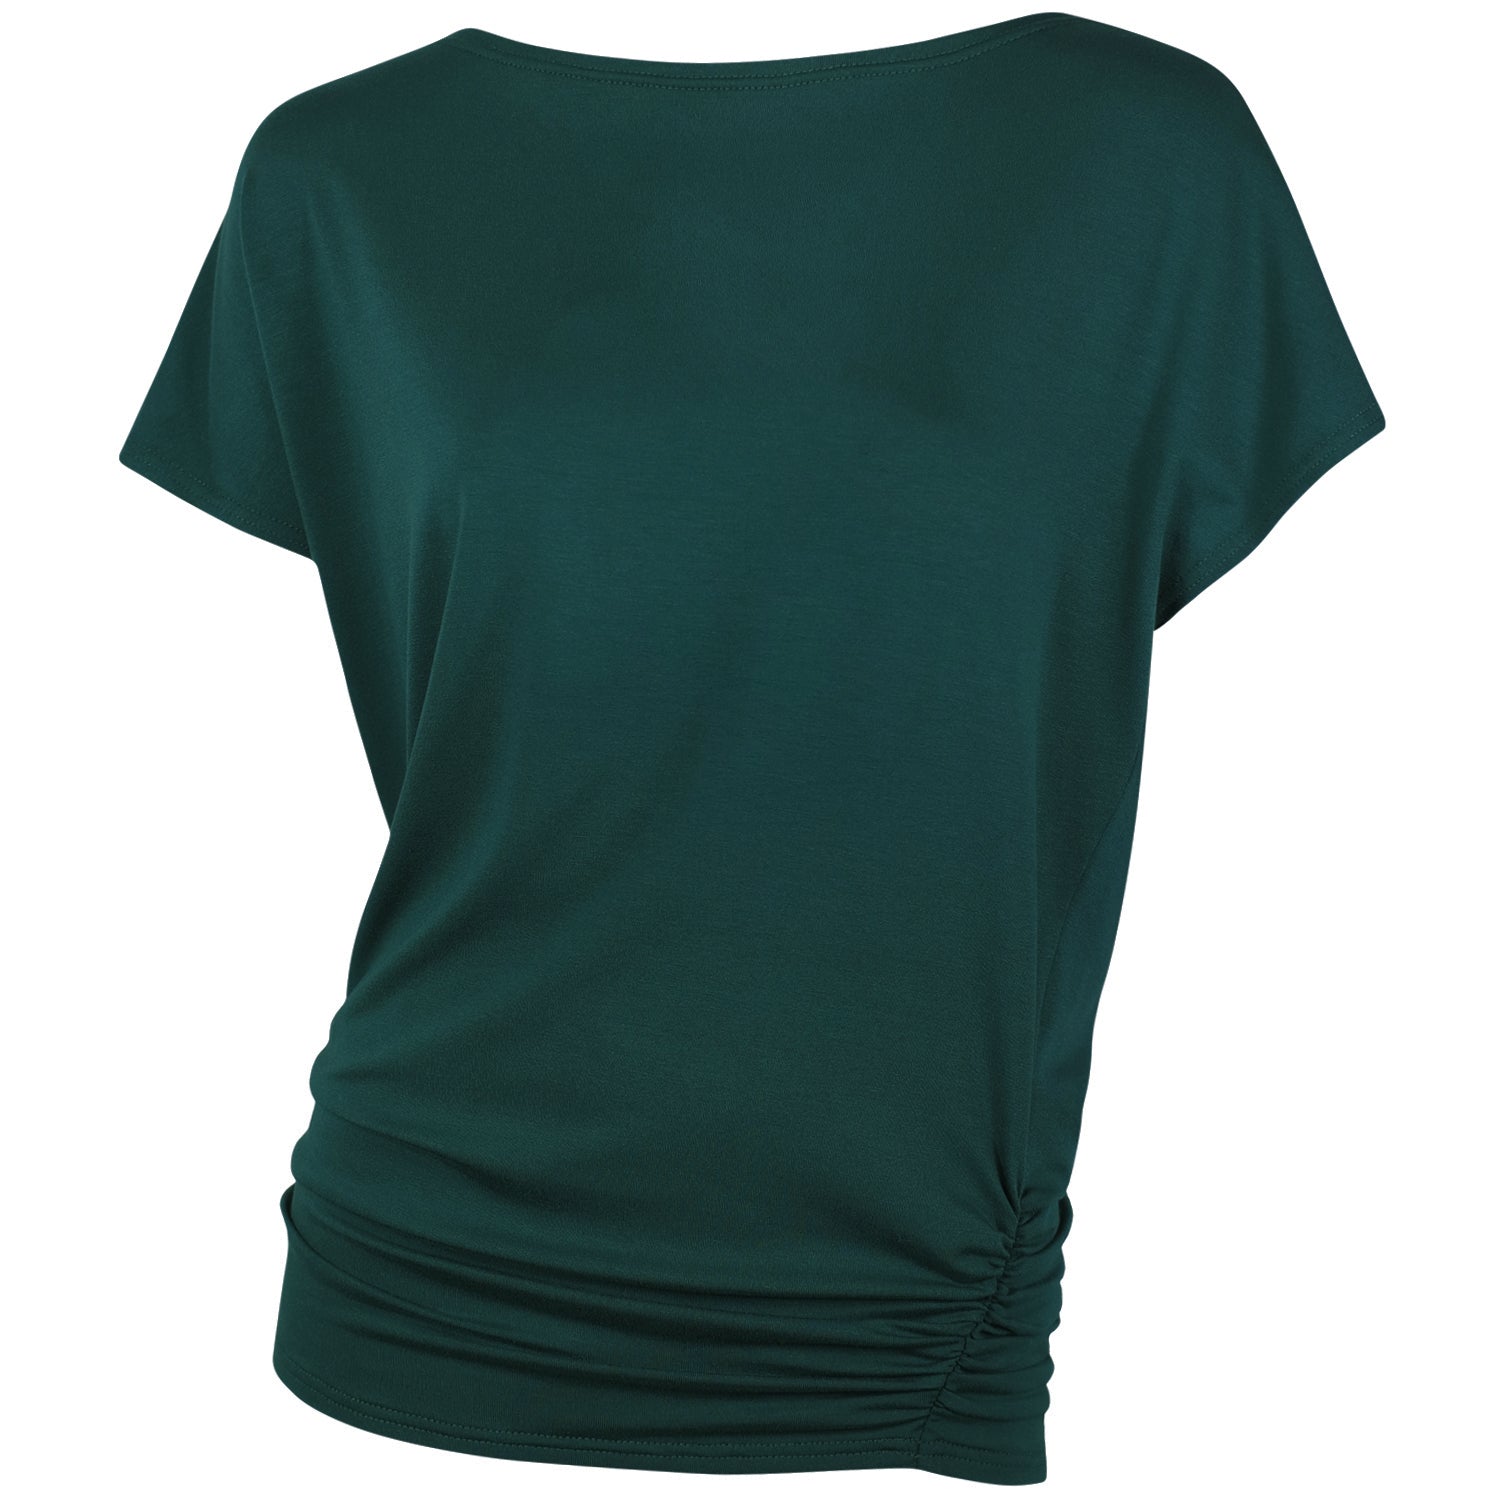 Me & Thee oversized tee in emerald green bamboo jersey with ruche detailing to the hemline